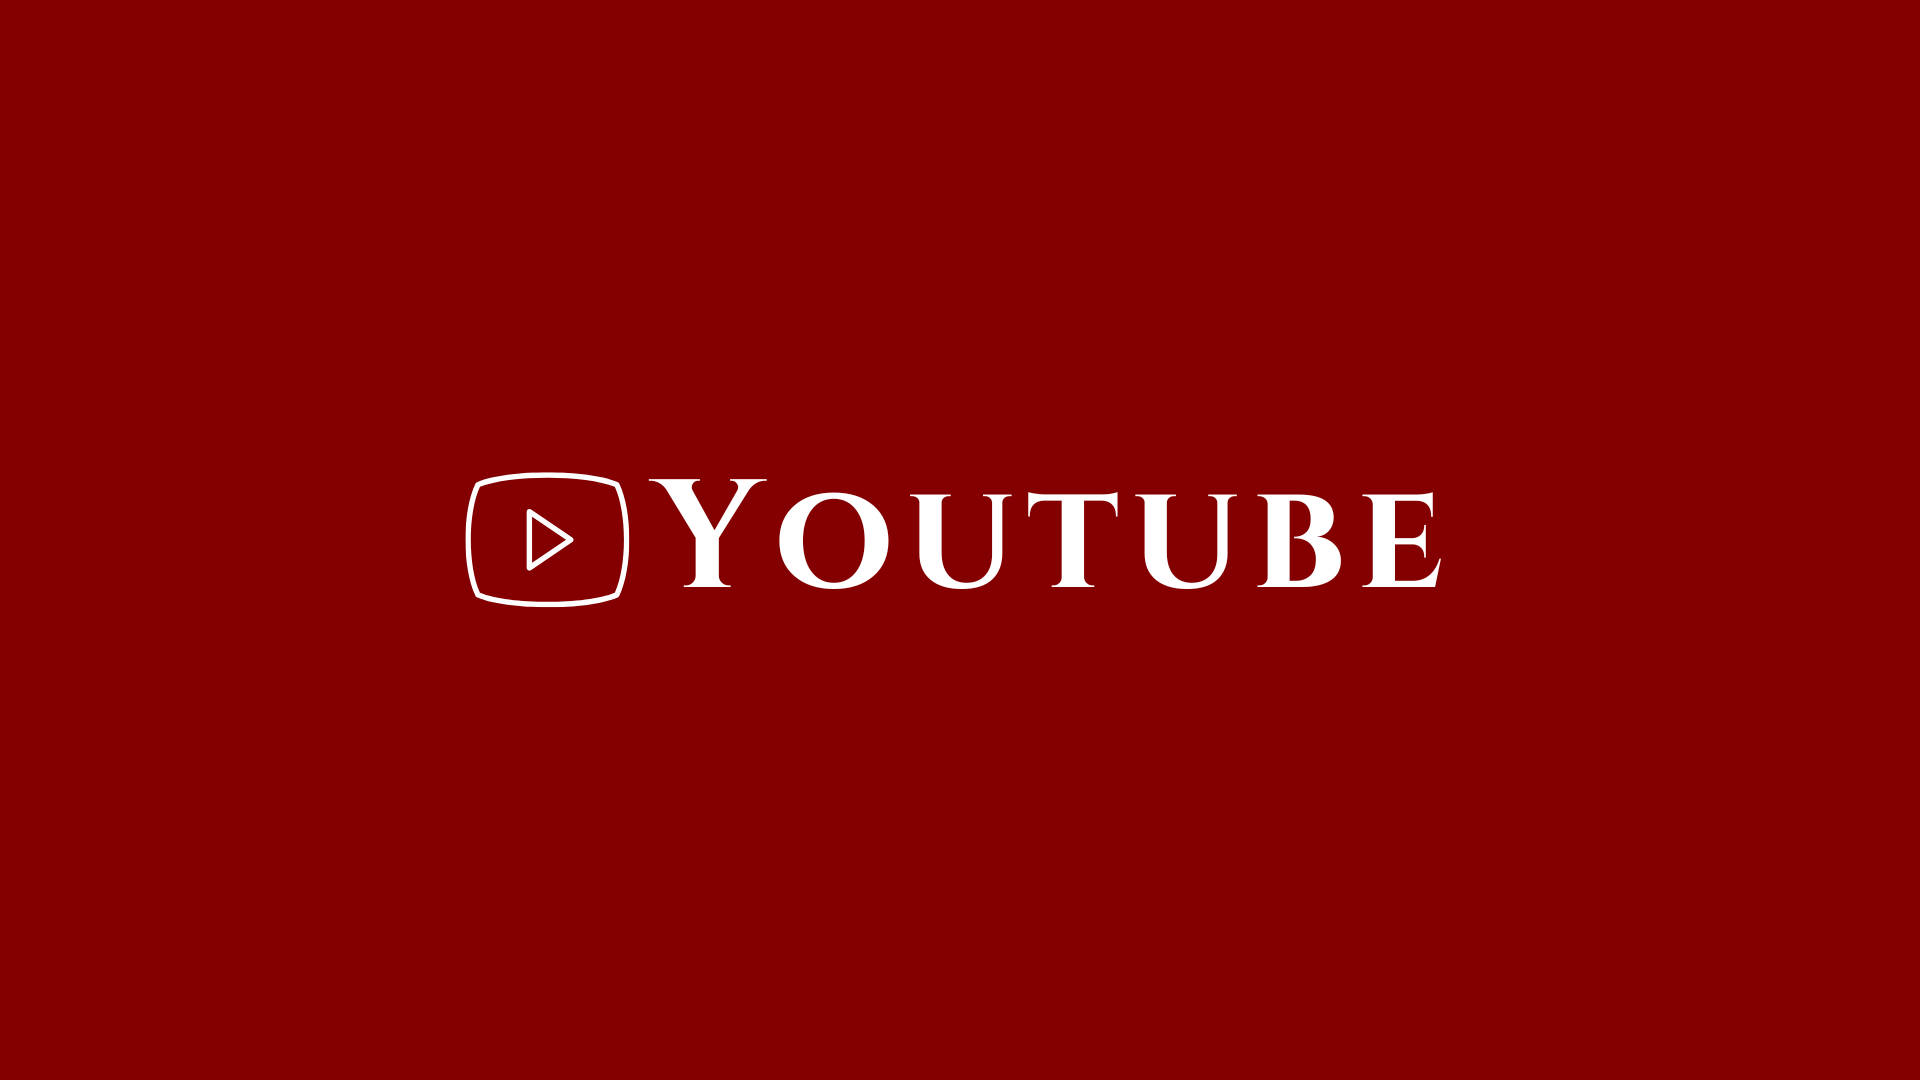 Youtube Logo And Name Deep Red